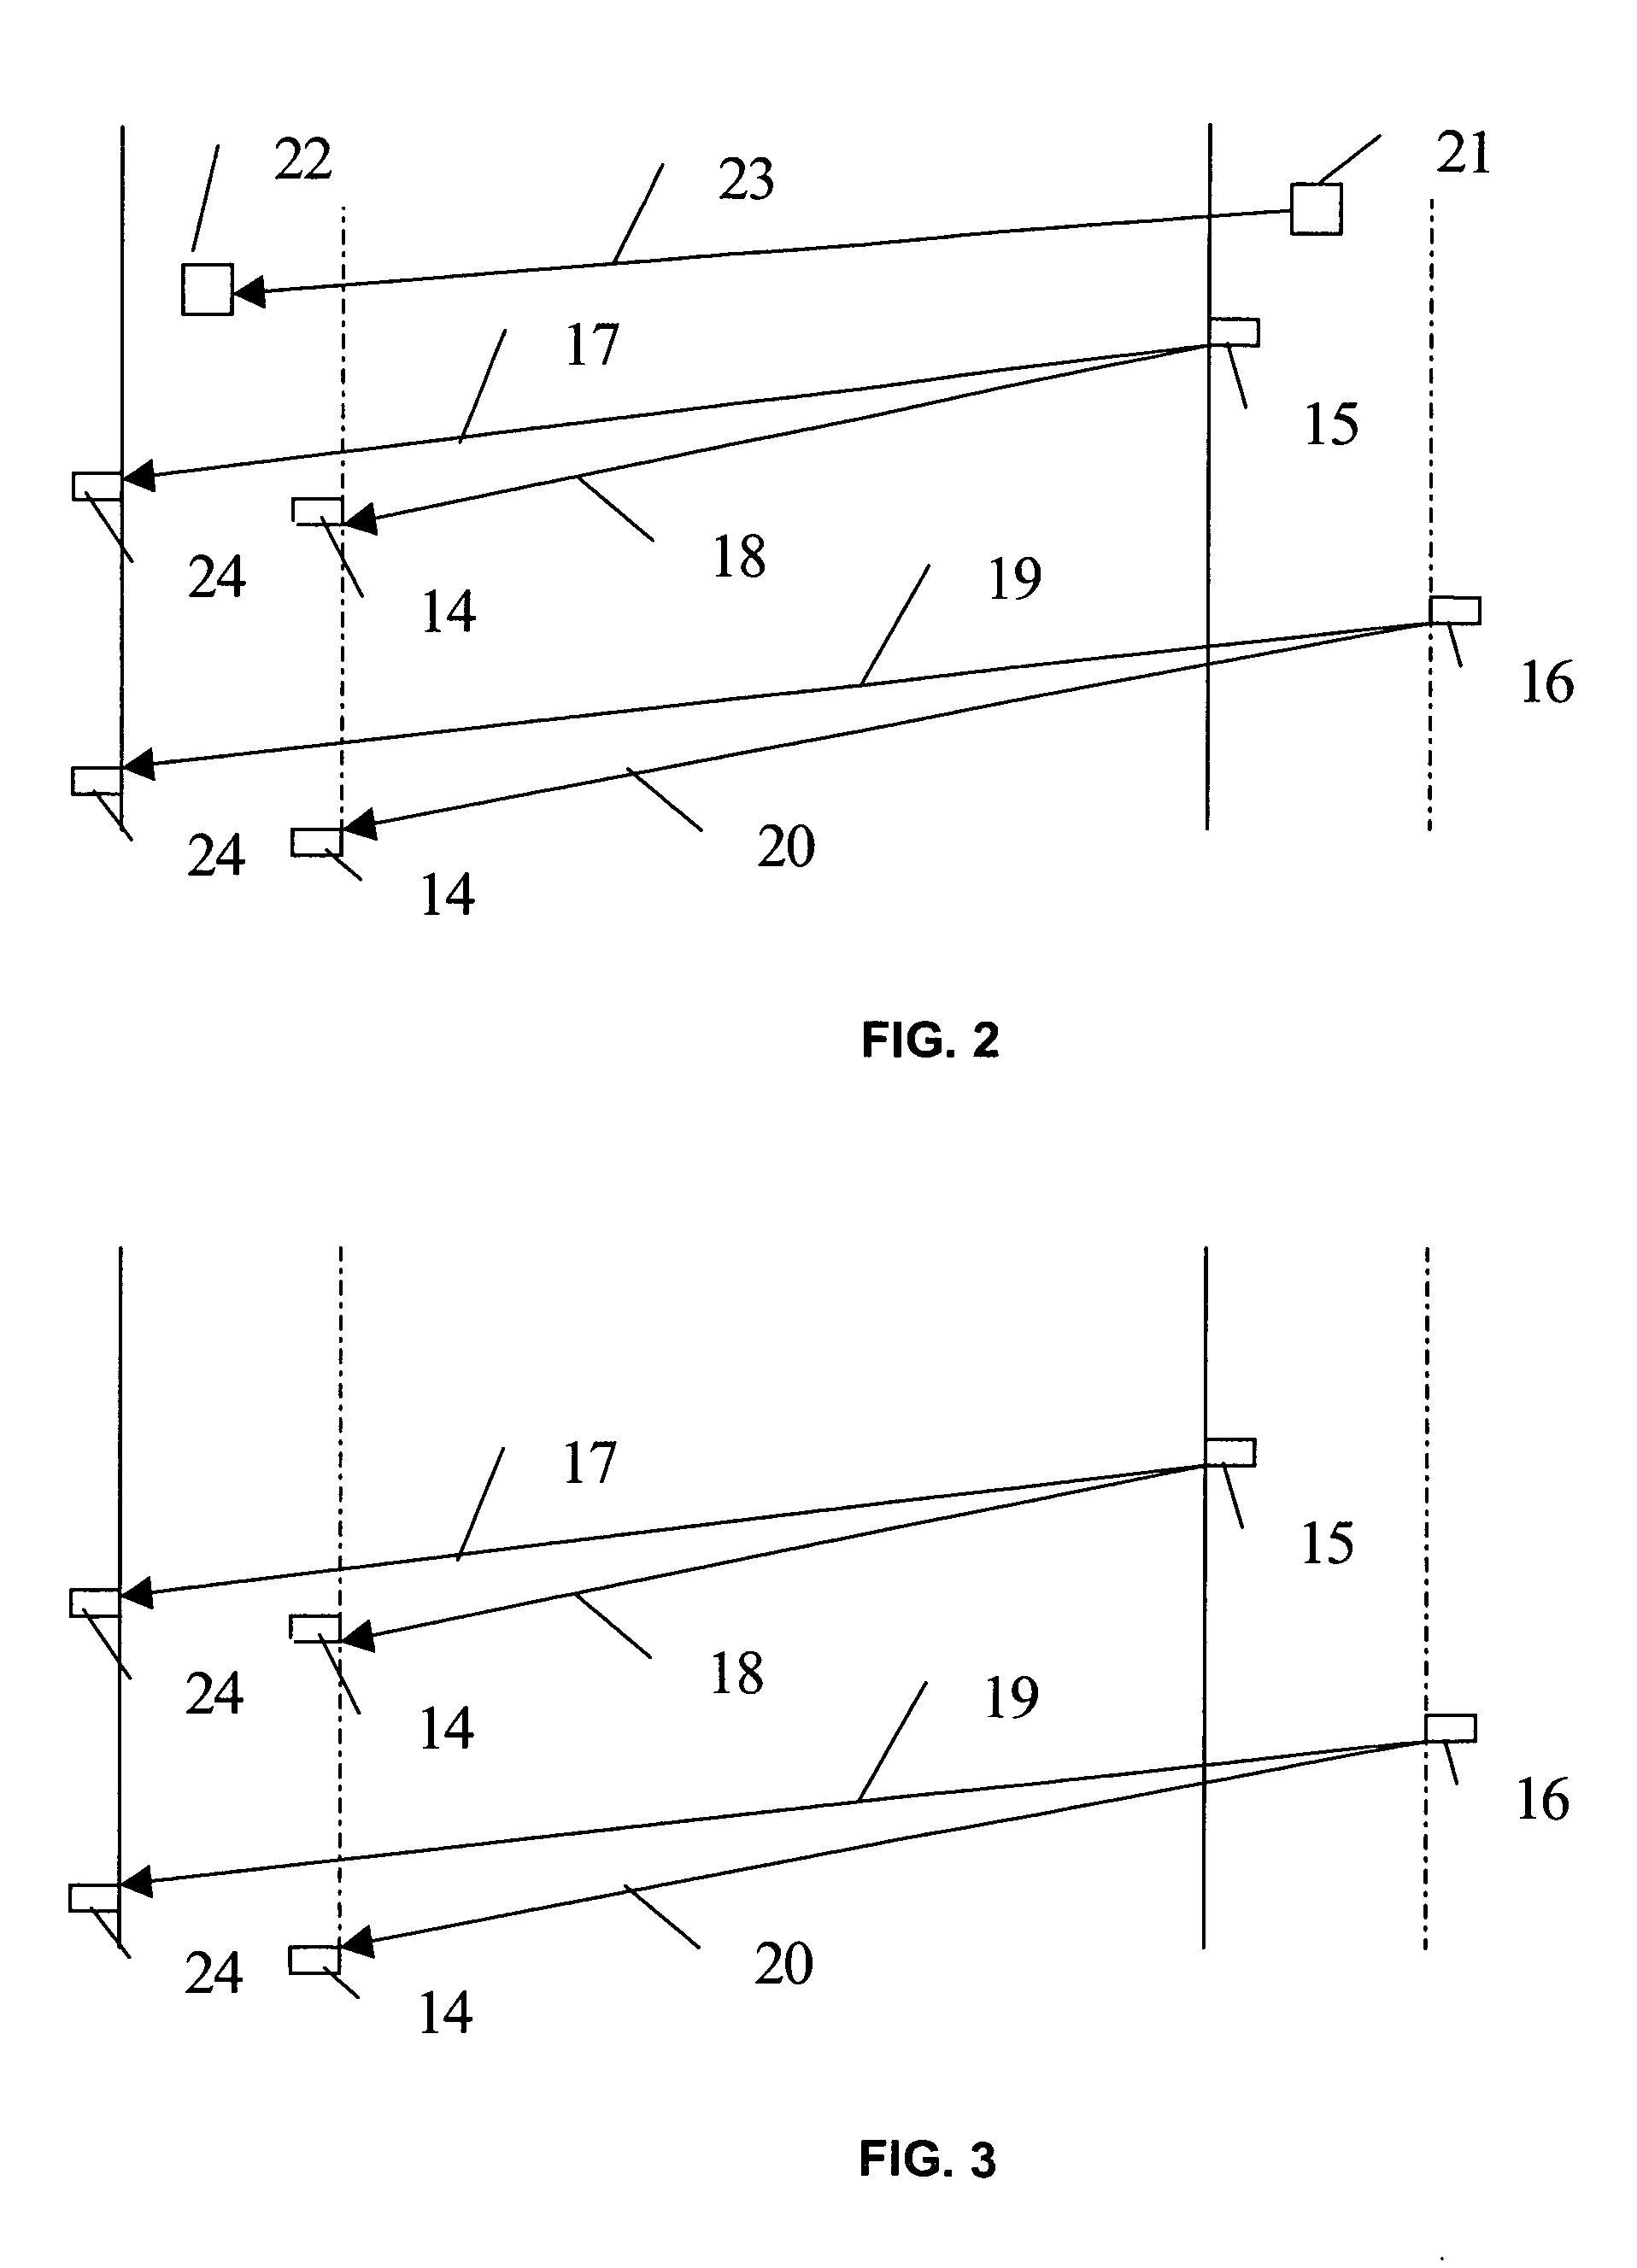 Method or device for coding a sequence of source pictures